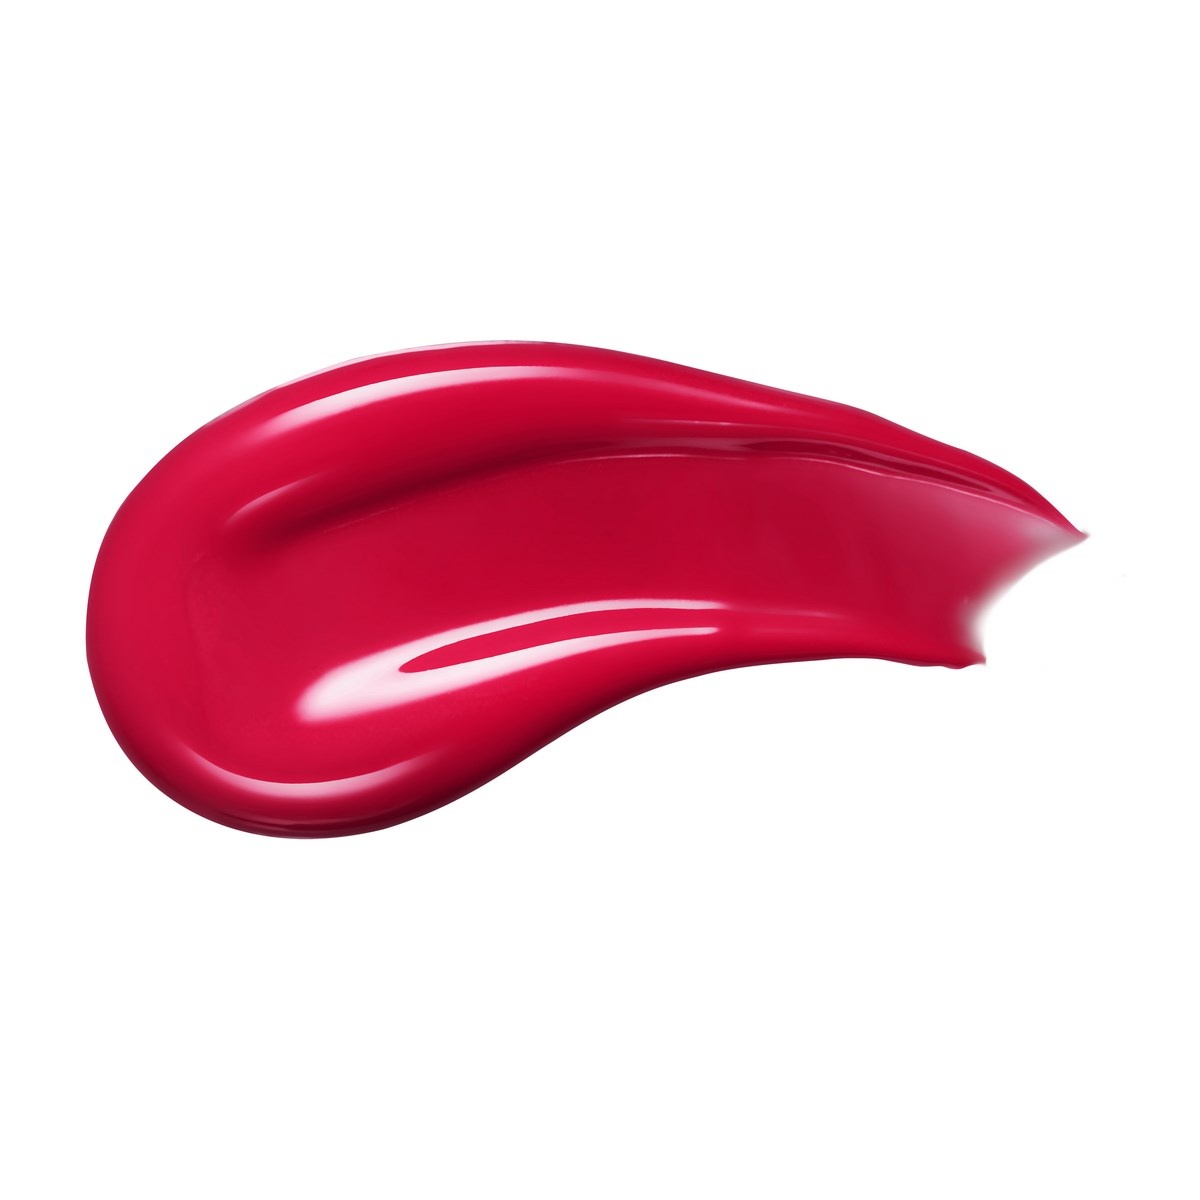  L'Absolu Lacquer Lipstick, 168 Rose Rouge